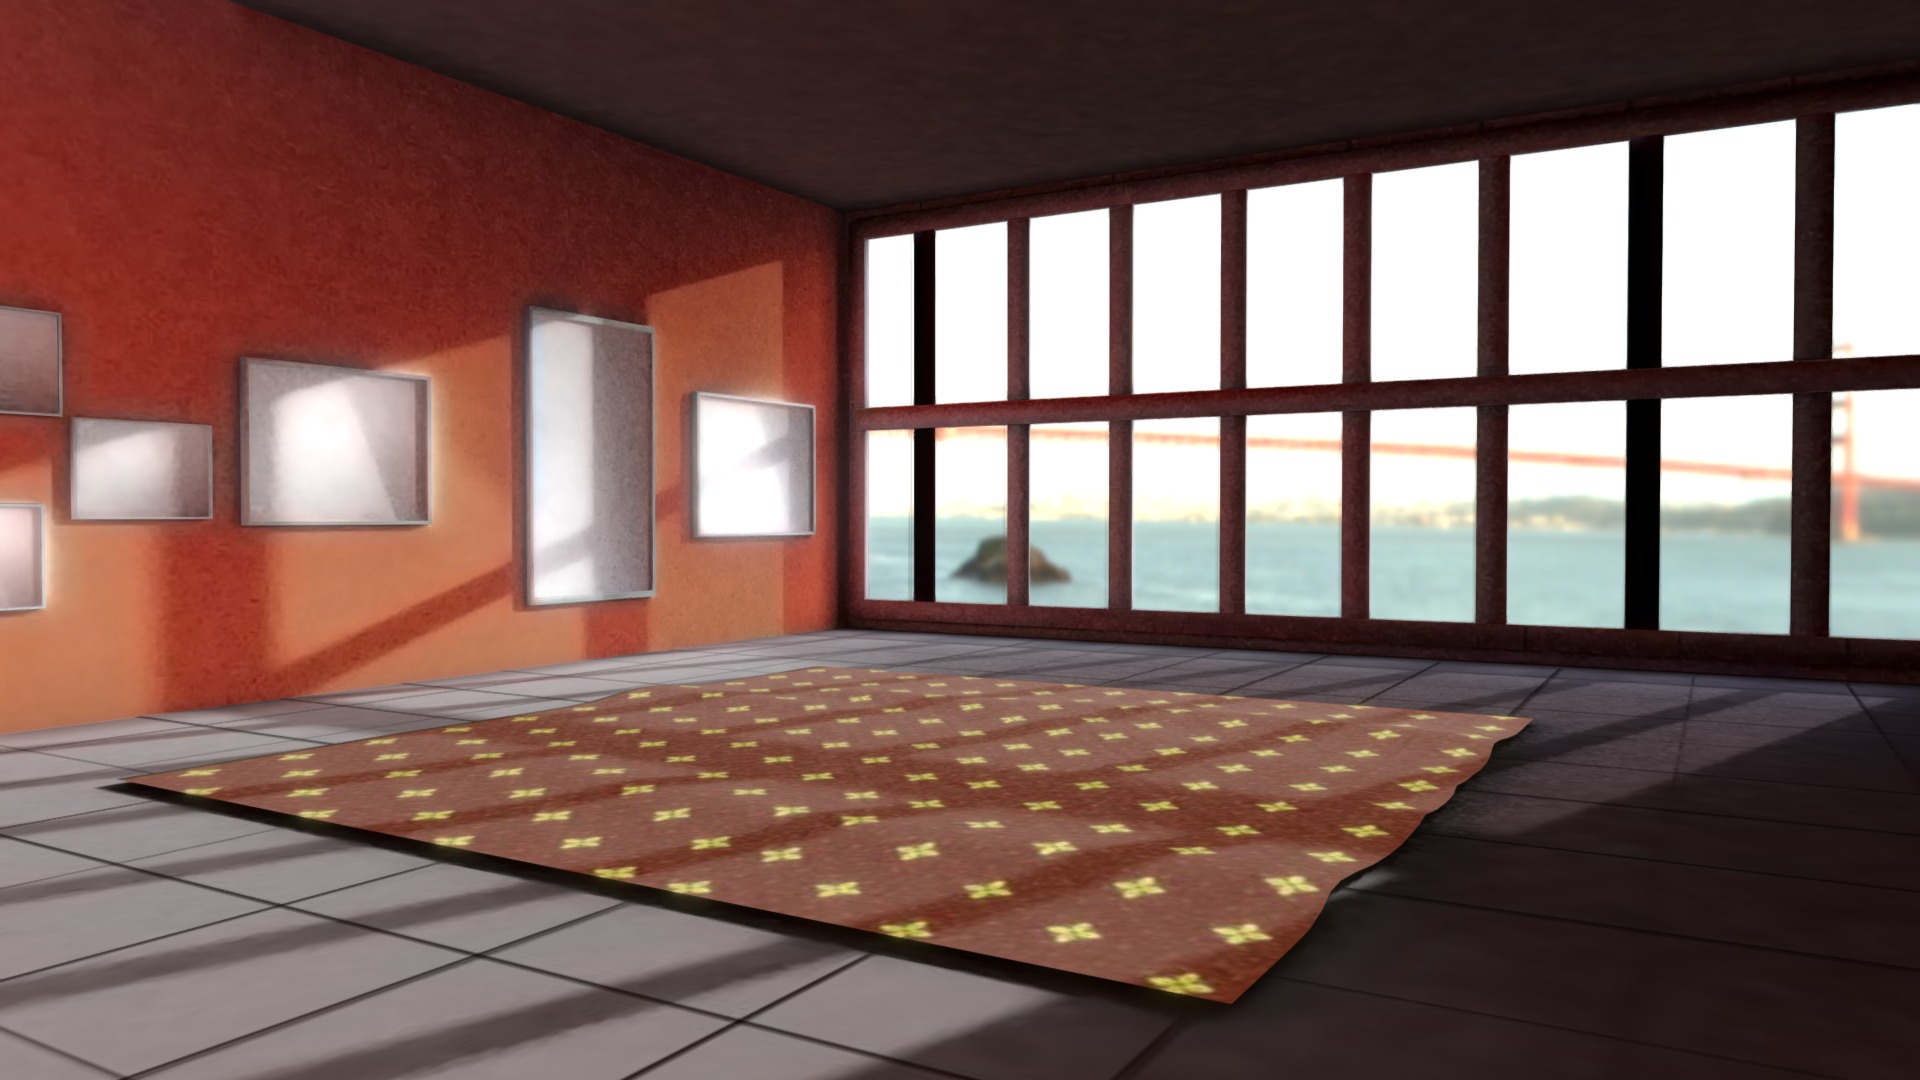 3D model VR Room – 06/09/2019 - This is a 3D model of the VR Room - 06/09/2019. The 3D model is about a room with a rug and windows.